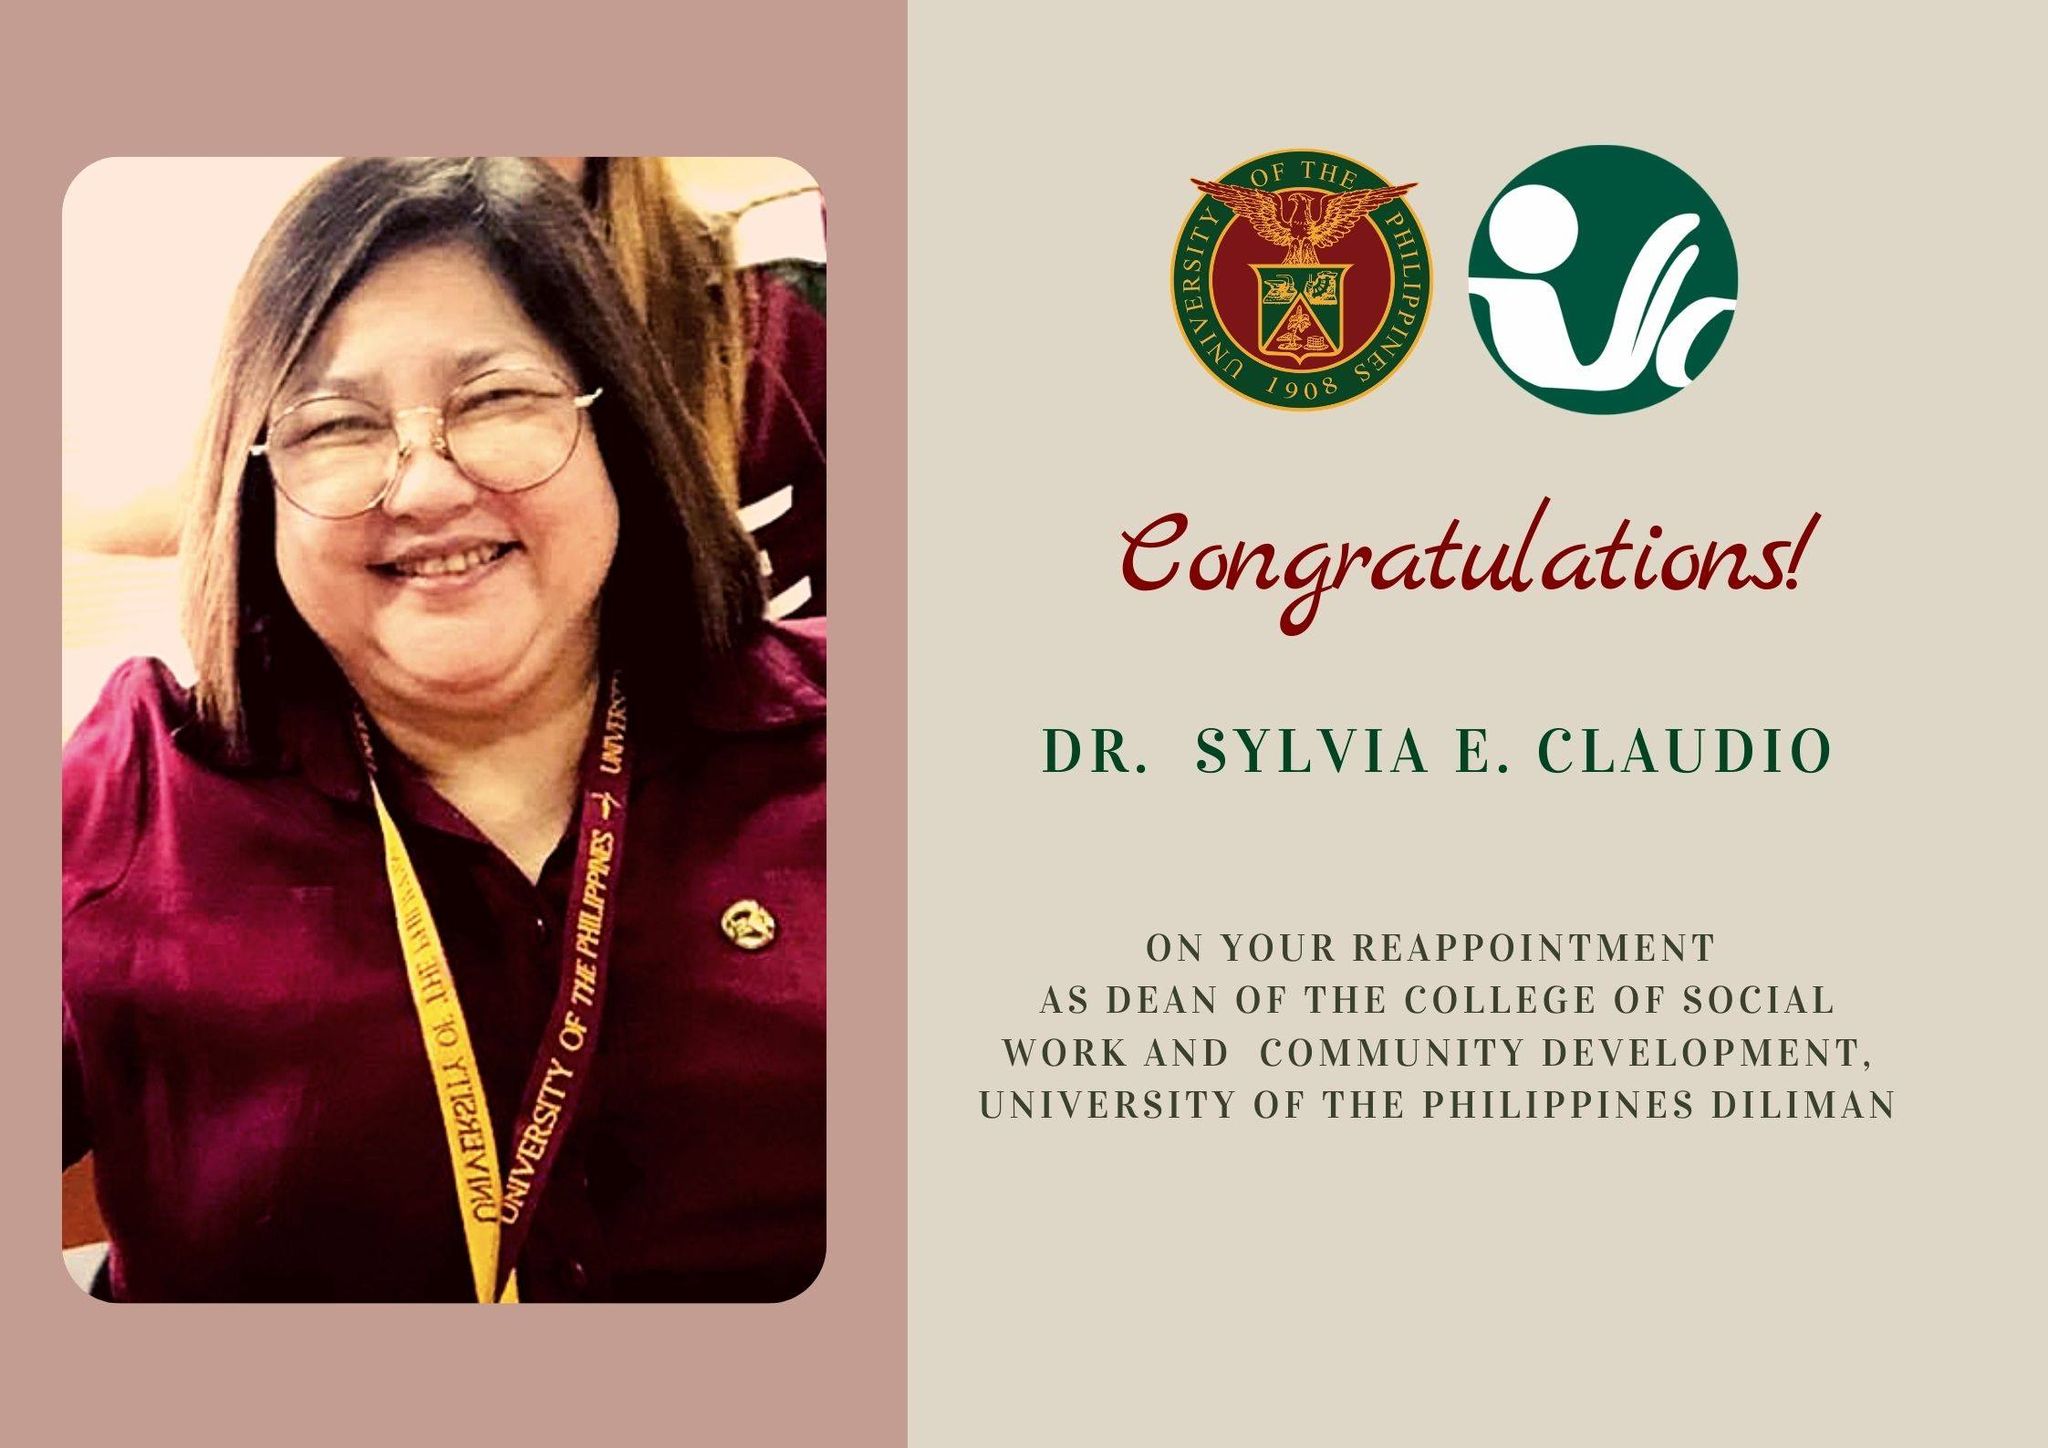 Congratulations Dr. Sylvia E. Claudio for being reappointed as CSWCD Dean